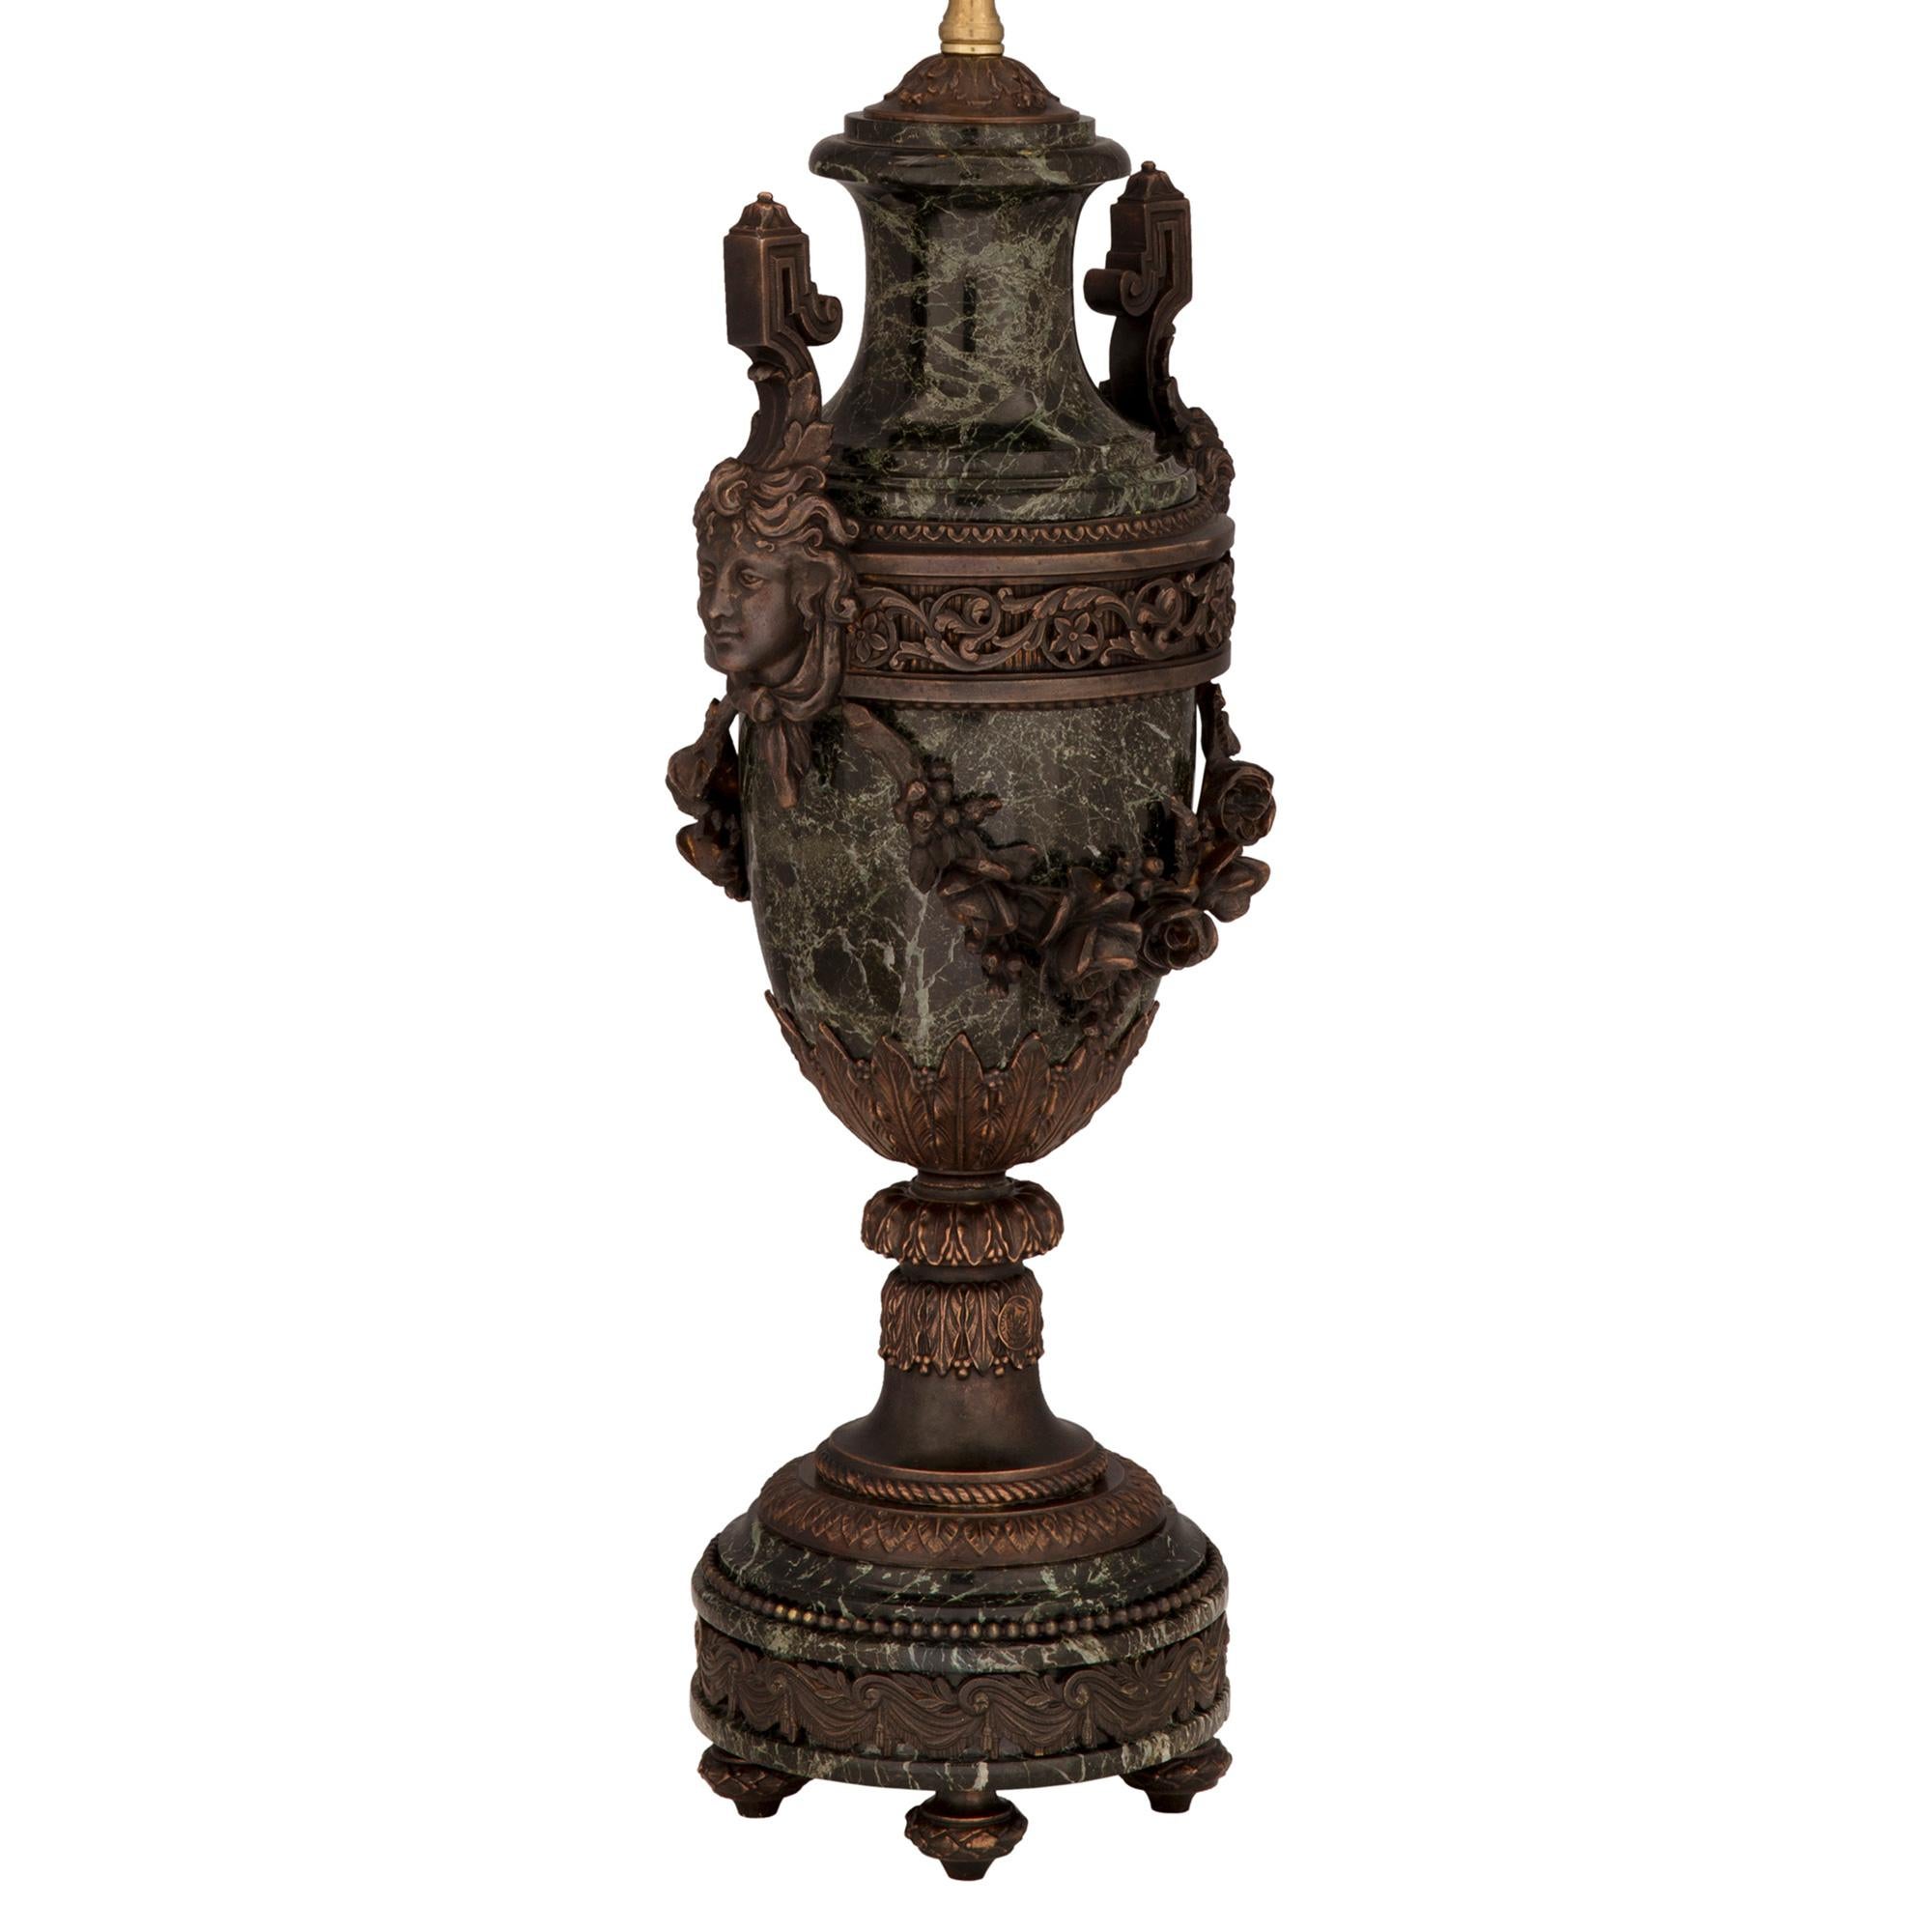 An elegant French 19th century Louis XVI st. patinated bronze, ormolu and Vert de Patricia marble lamp. The lamp is raised by fine topie shaped feet with a lovely berried laurel band. The Vert de Patricia circular base displays a beautiful fitted